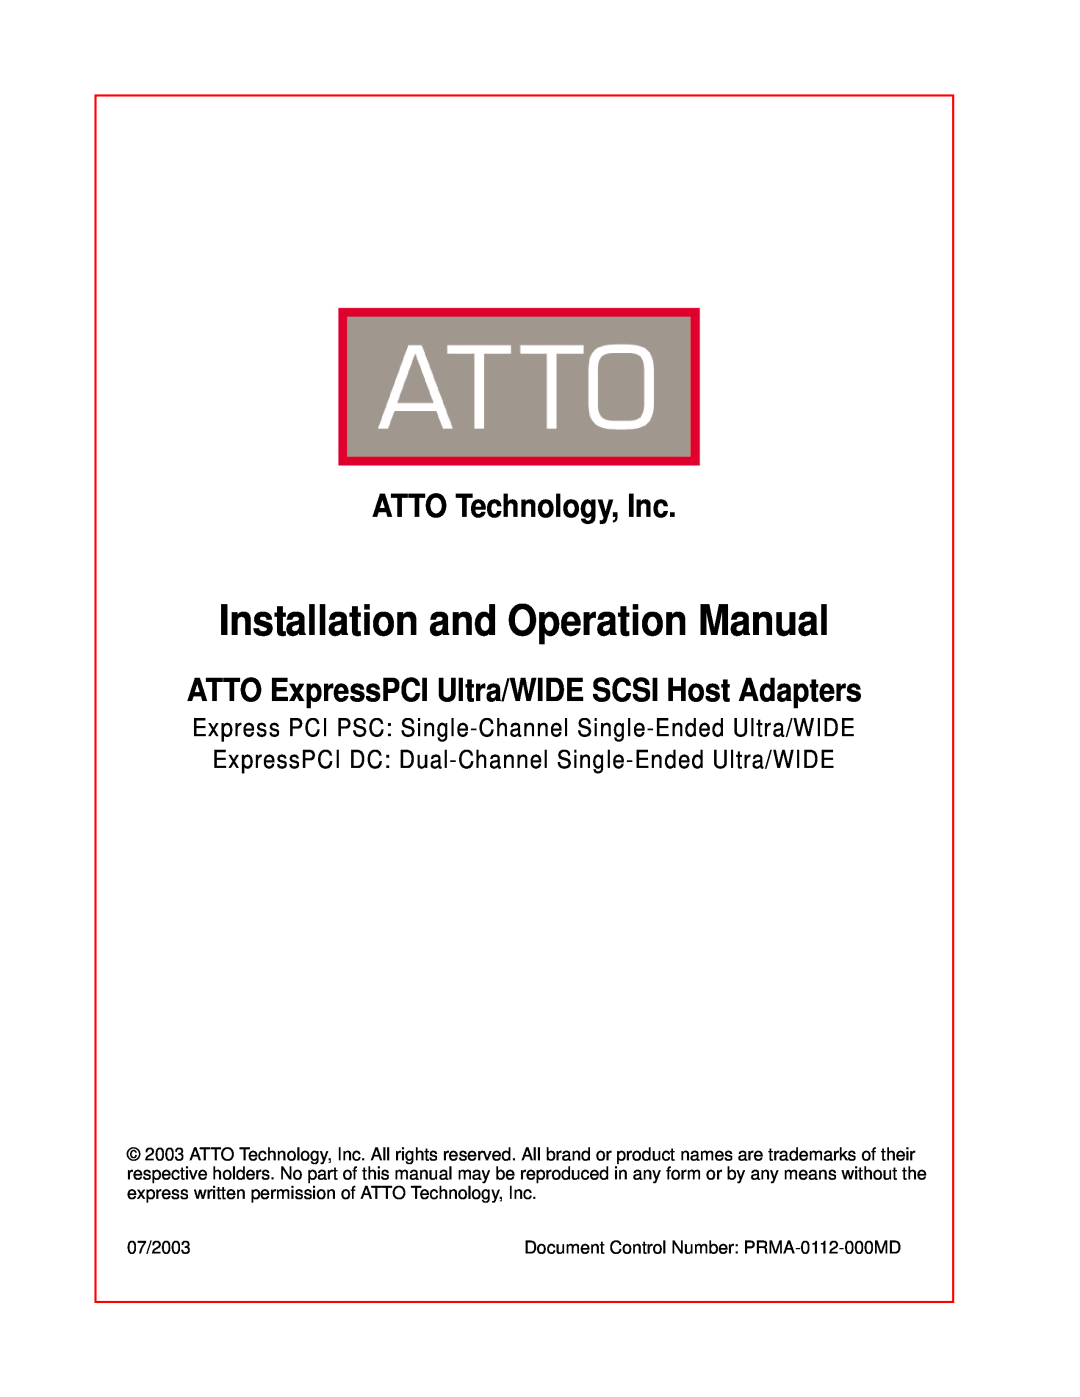 ATTO Technology operation manual ATTO Technology, Inc, ATTO ExpressPCI Ultra/WIDE SCSI Host Adapters 